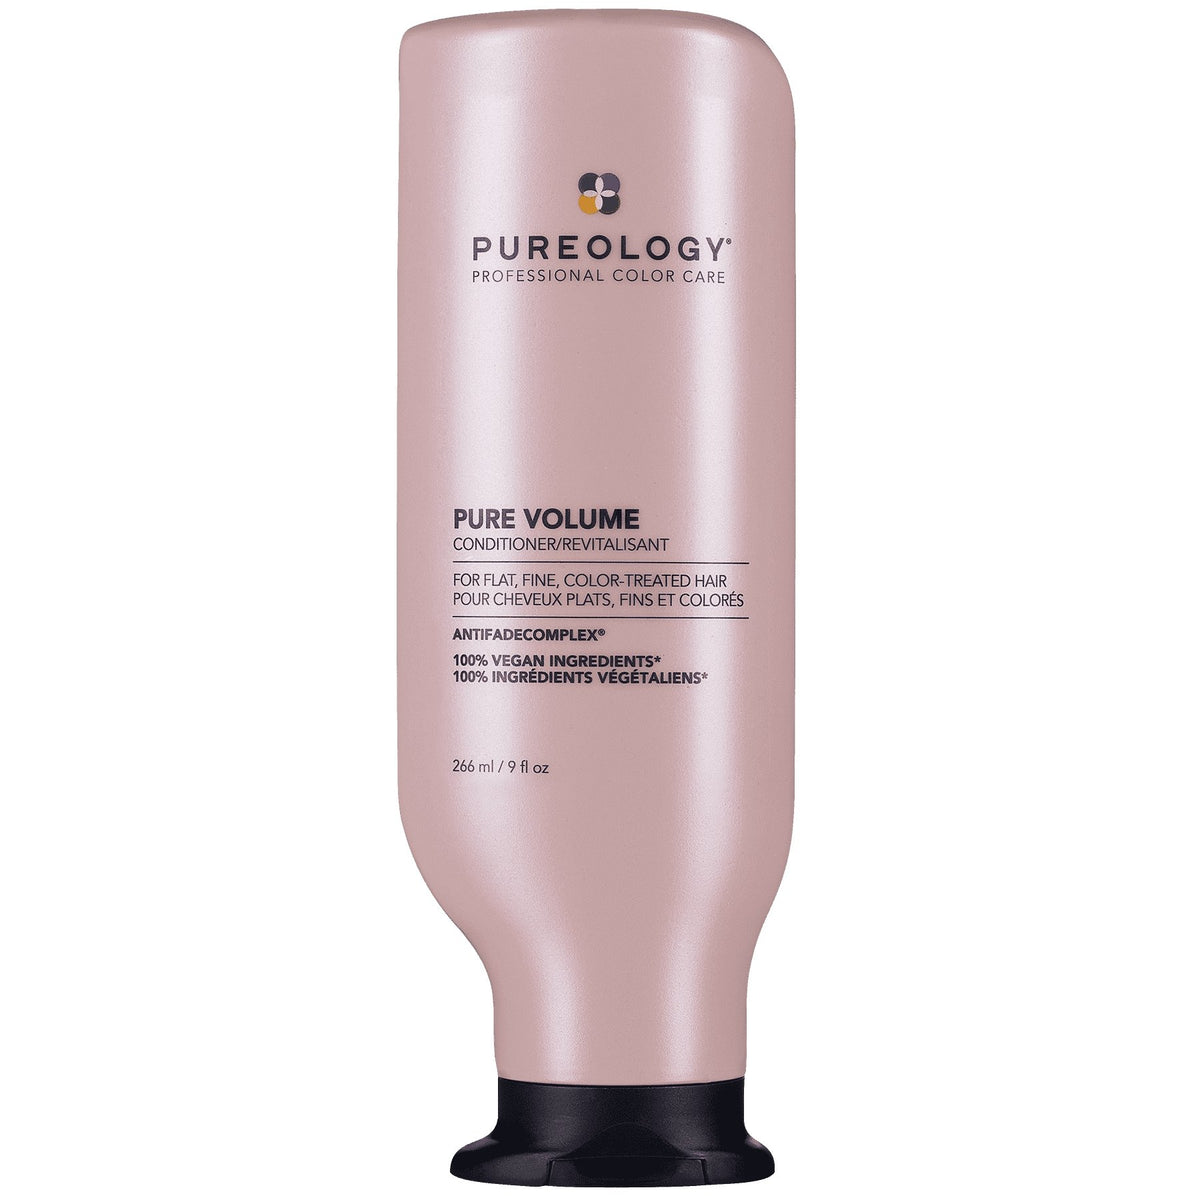 Pureology Pure Volume Conditioner - Blend Box